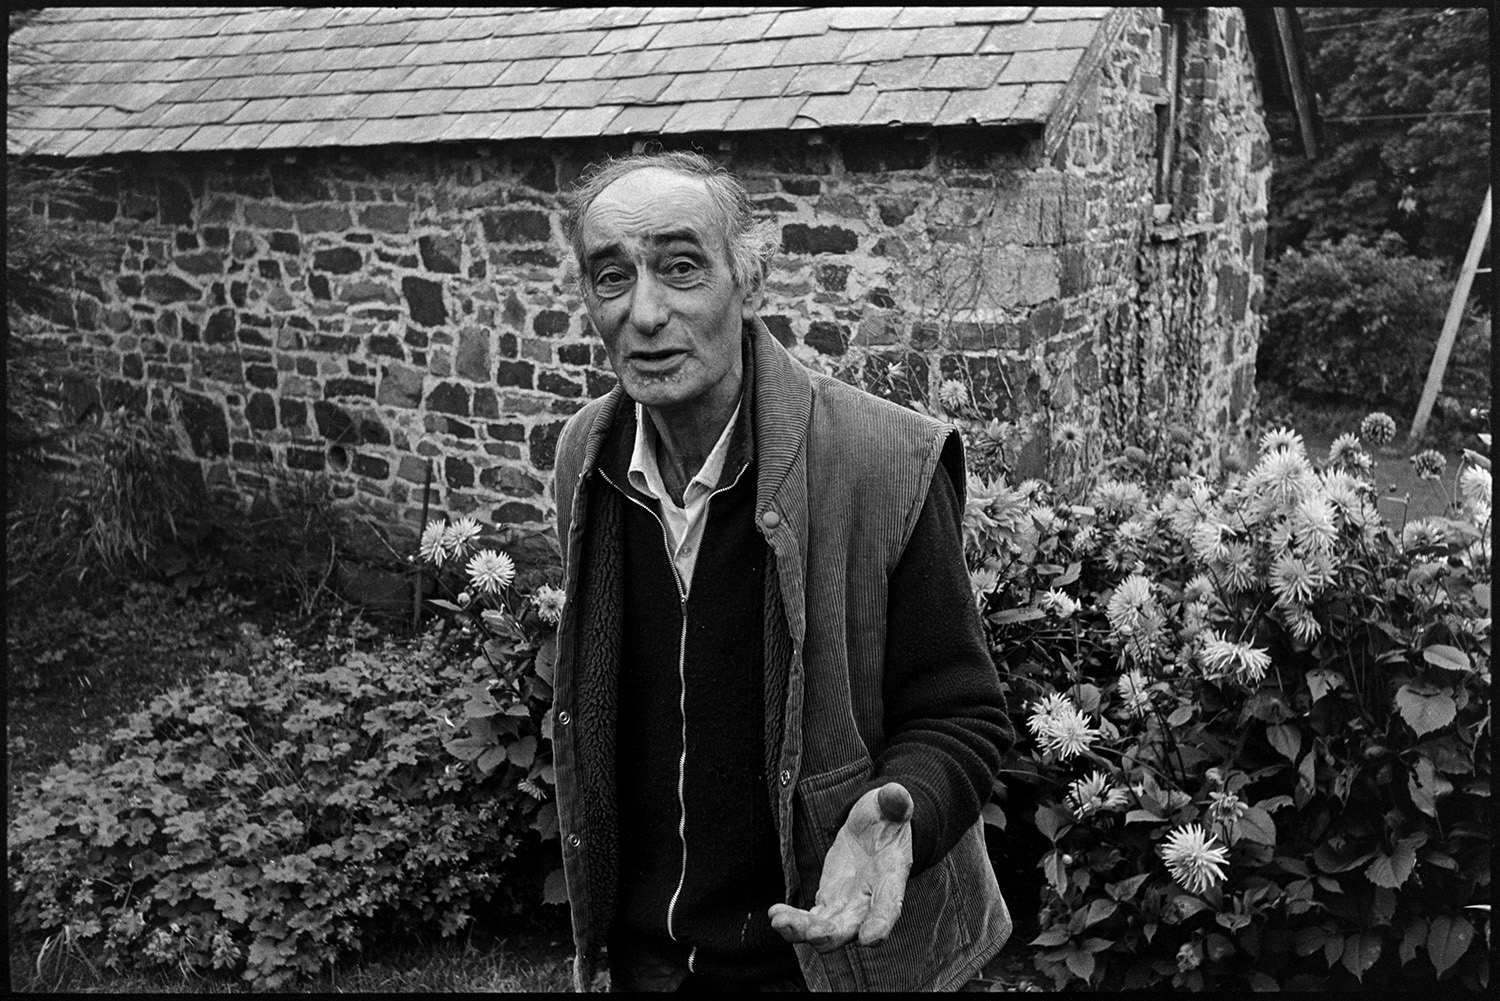 Doctor on rounds talking to man patient outside his house looking at his flowers. 
[Mr Bolzone talking to Doctor Richard Westcott (not pictured in the image) by flowers and a stone and slate building in his garden.]